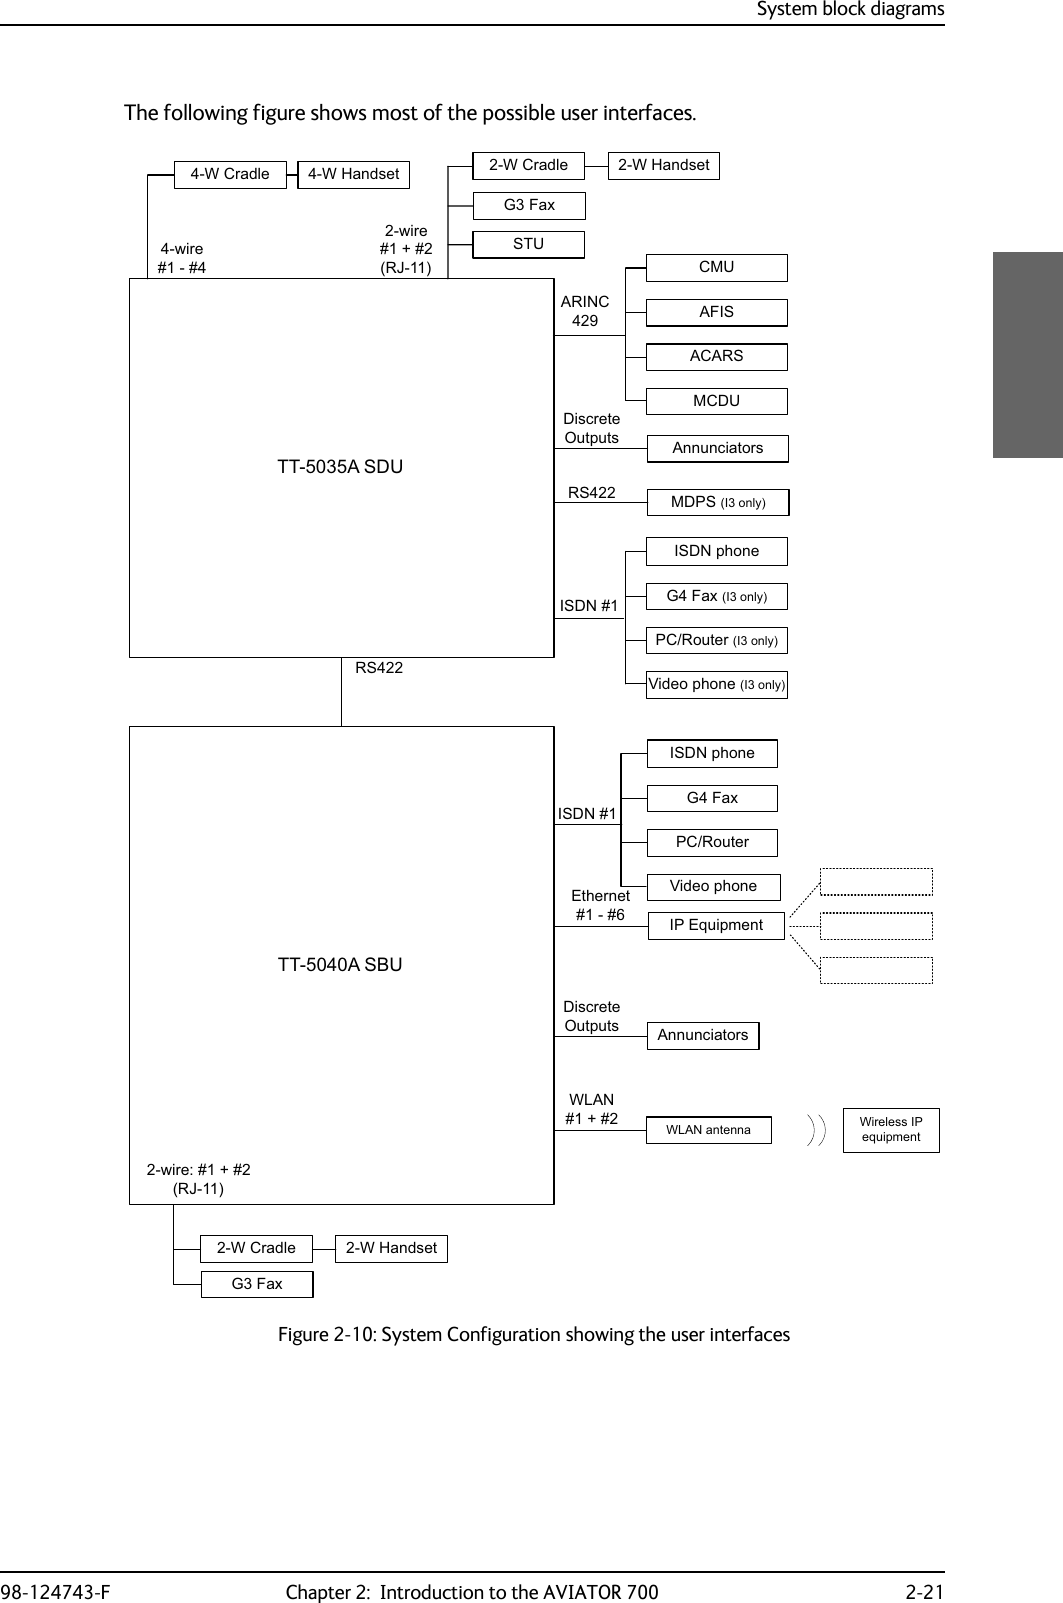 System block diagrams98-124743-F Chapter 2:  Introduction to the AVIATOR 700 2-21The following figure shows most of the possible user interfaces.   Figure 2-10: System Configuration showing the user interfaces77$6&apos;8*)D[678&amp;08$),6$&amp;$560&amp;&apos;8ZLUH5-$5,1&amp;:&amp;UDGOHZLUH:+DQGVHW:&amp;UDGOH :+DQGVHW$QQXQFLDWRUV&apos;LVFUHWH2XWSXWV77$6%8,3(TXLSPHQW,6&apos;1(WKHUQHW$QQXQFLDWRUV&apos;LVFUHWH2XWSXWV*)D[:&amp;UDGOH :+DQGVHW56,6&apos;1:/$1DQWHQQD :LUHOHVV,3HTXLSPHQWZLUH5-:/$1560&apos;36,RQO\,6&apos;1SKRQH*)D[3&amp;5RXWHU9LGHRSKRQH,6&apos;1SKRQH*)D[,RQO\3&amp;5RXWHU,RQO\9LGHRSKRQH,RQO\